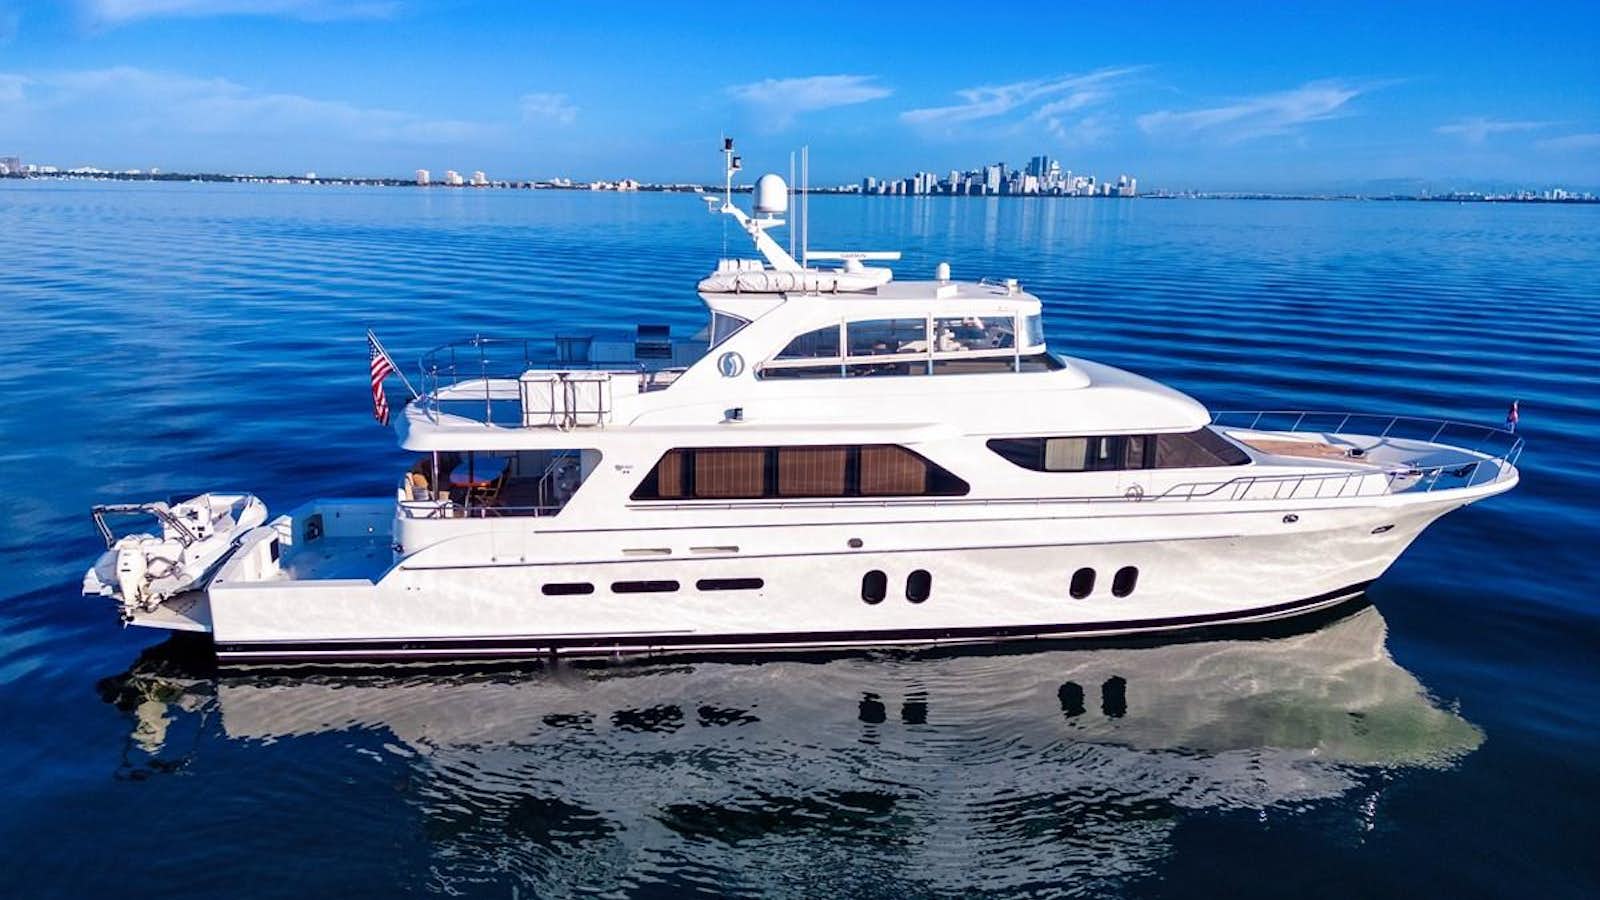 Jus chill'n
Yacht for Sale